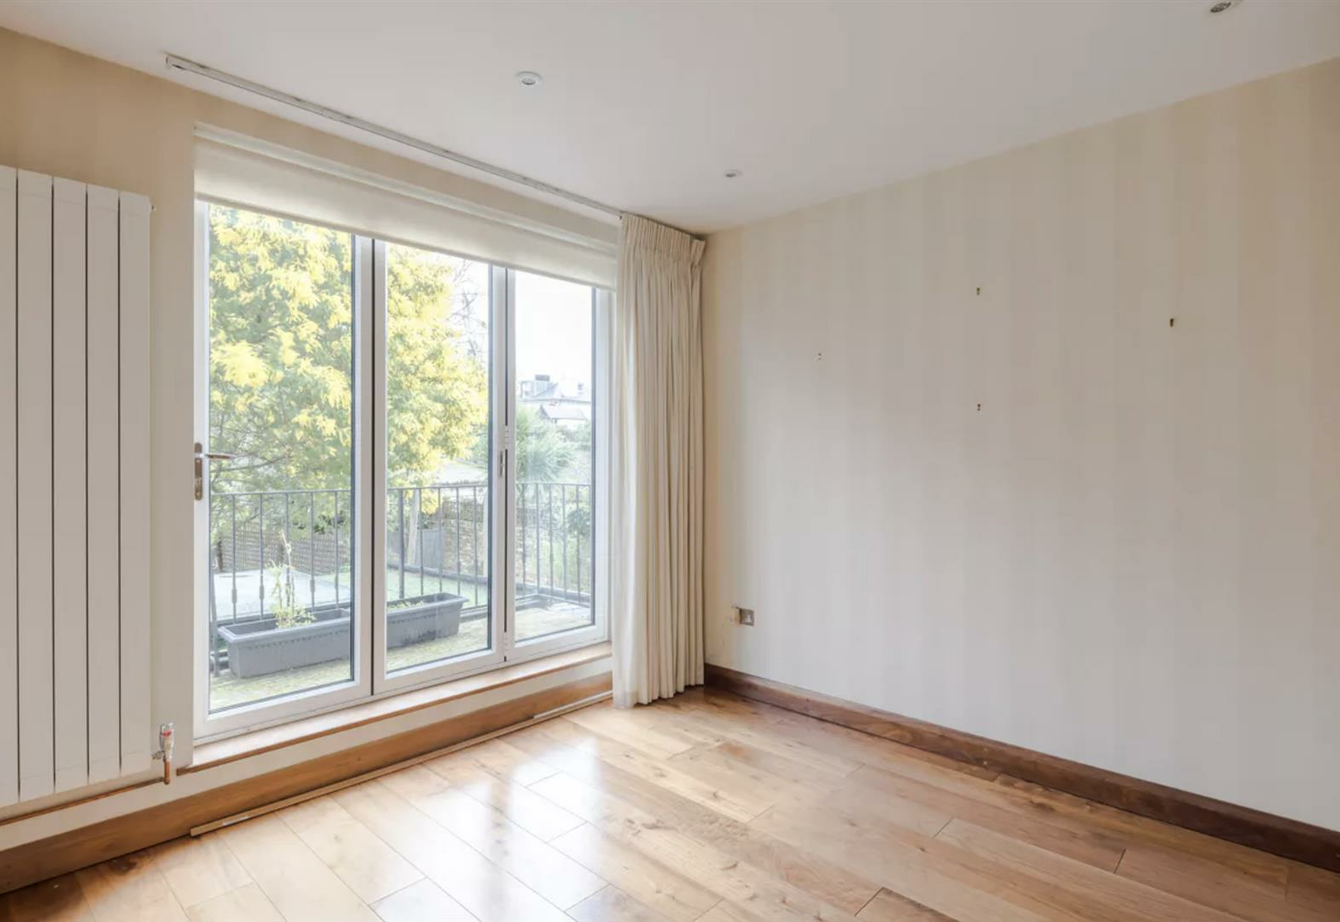 for-sale-abbey-road-london-410-view6